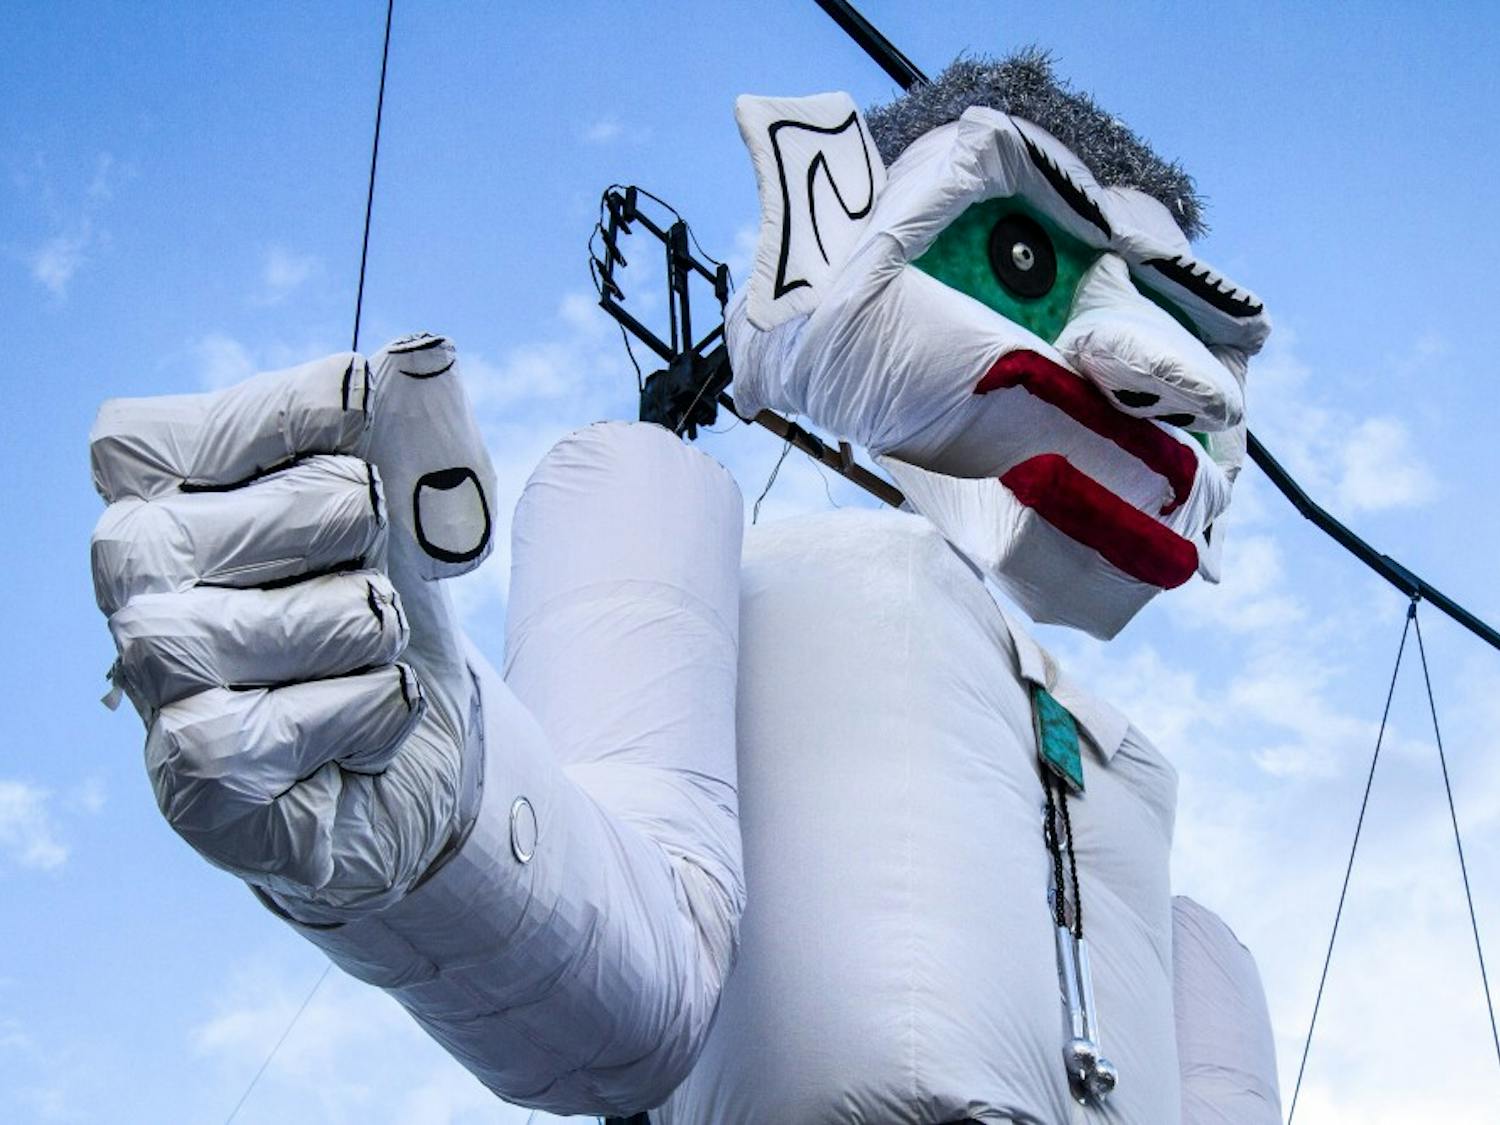 The 50-foot-tall Zozobra marionette is suspended midday on the first day of Fiestas De Santa Fe on Monday, Aug. 31, 2018.